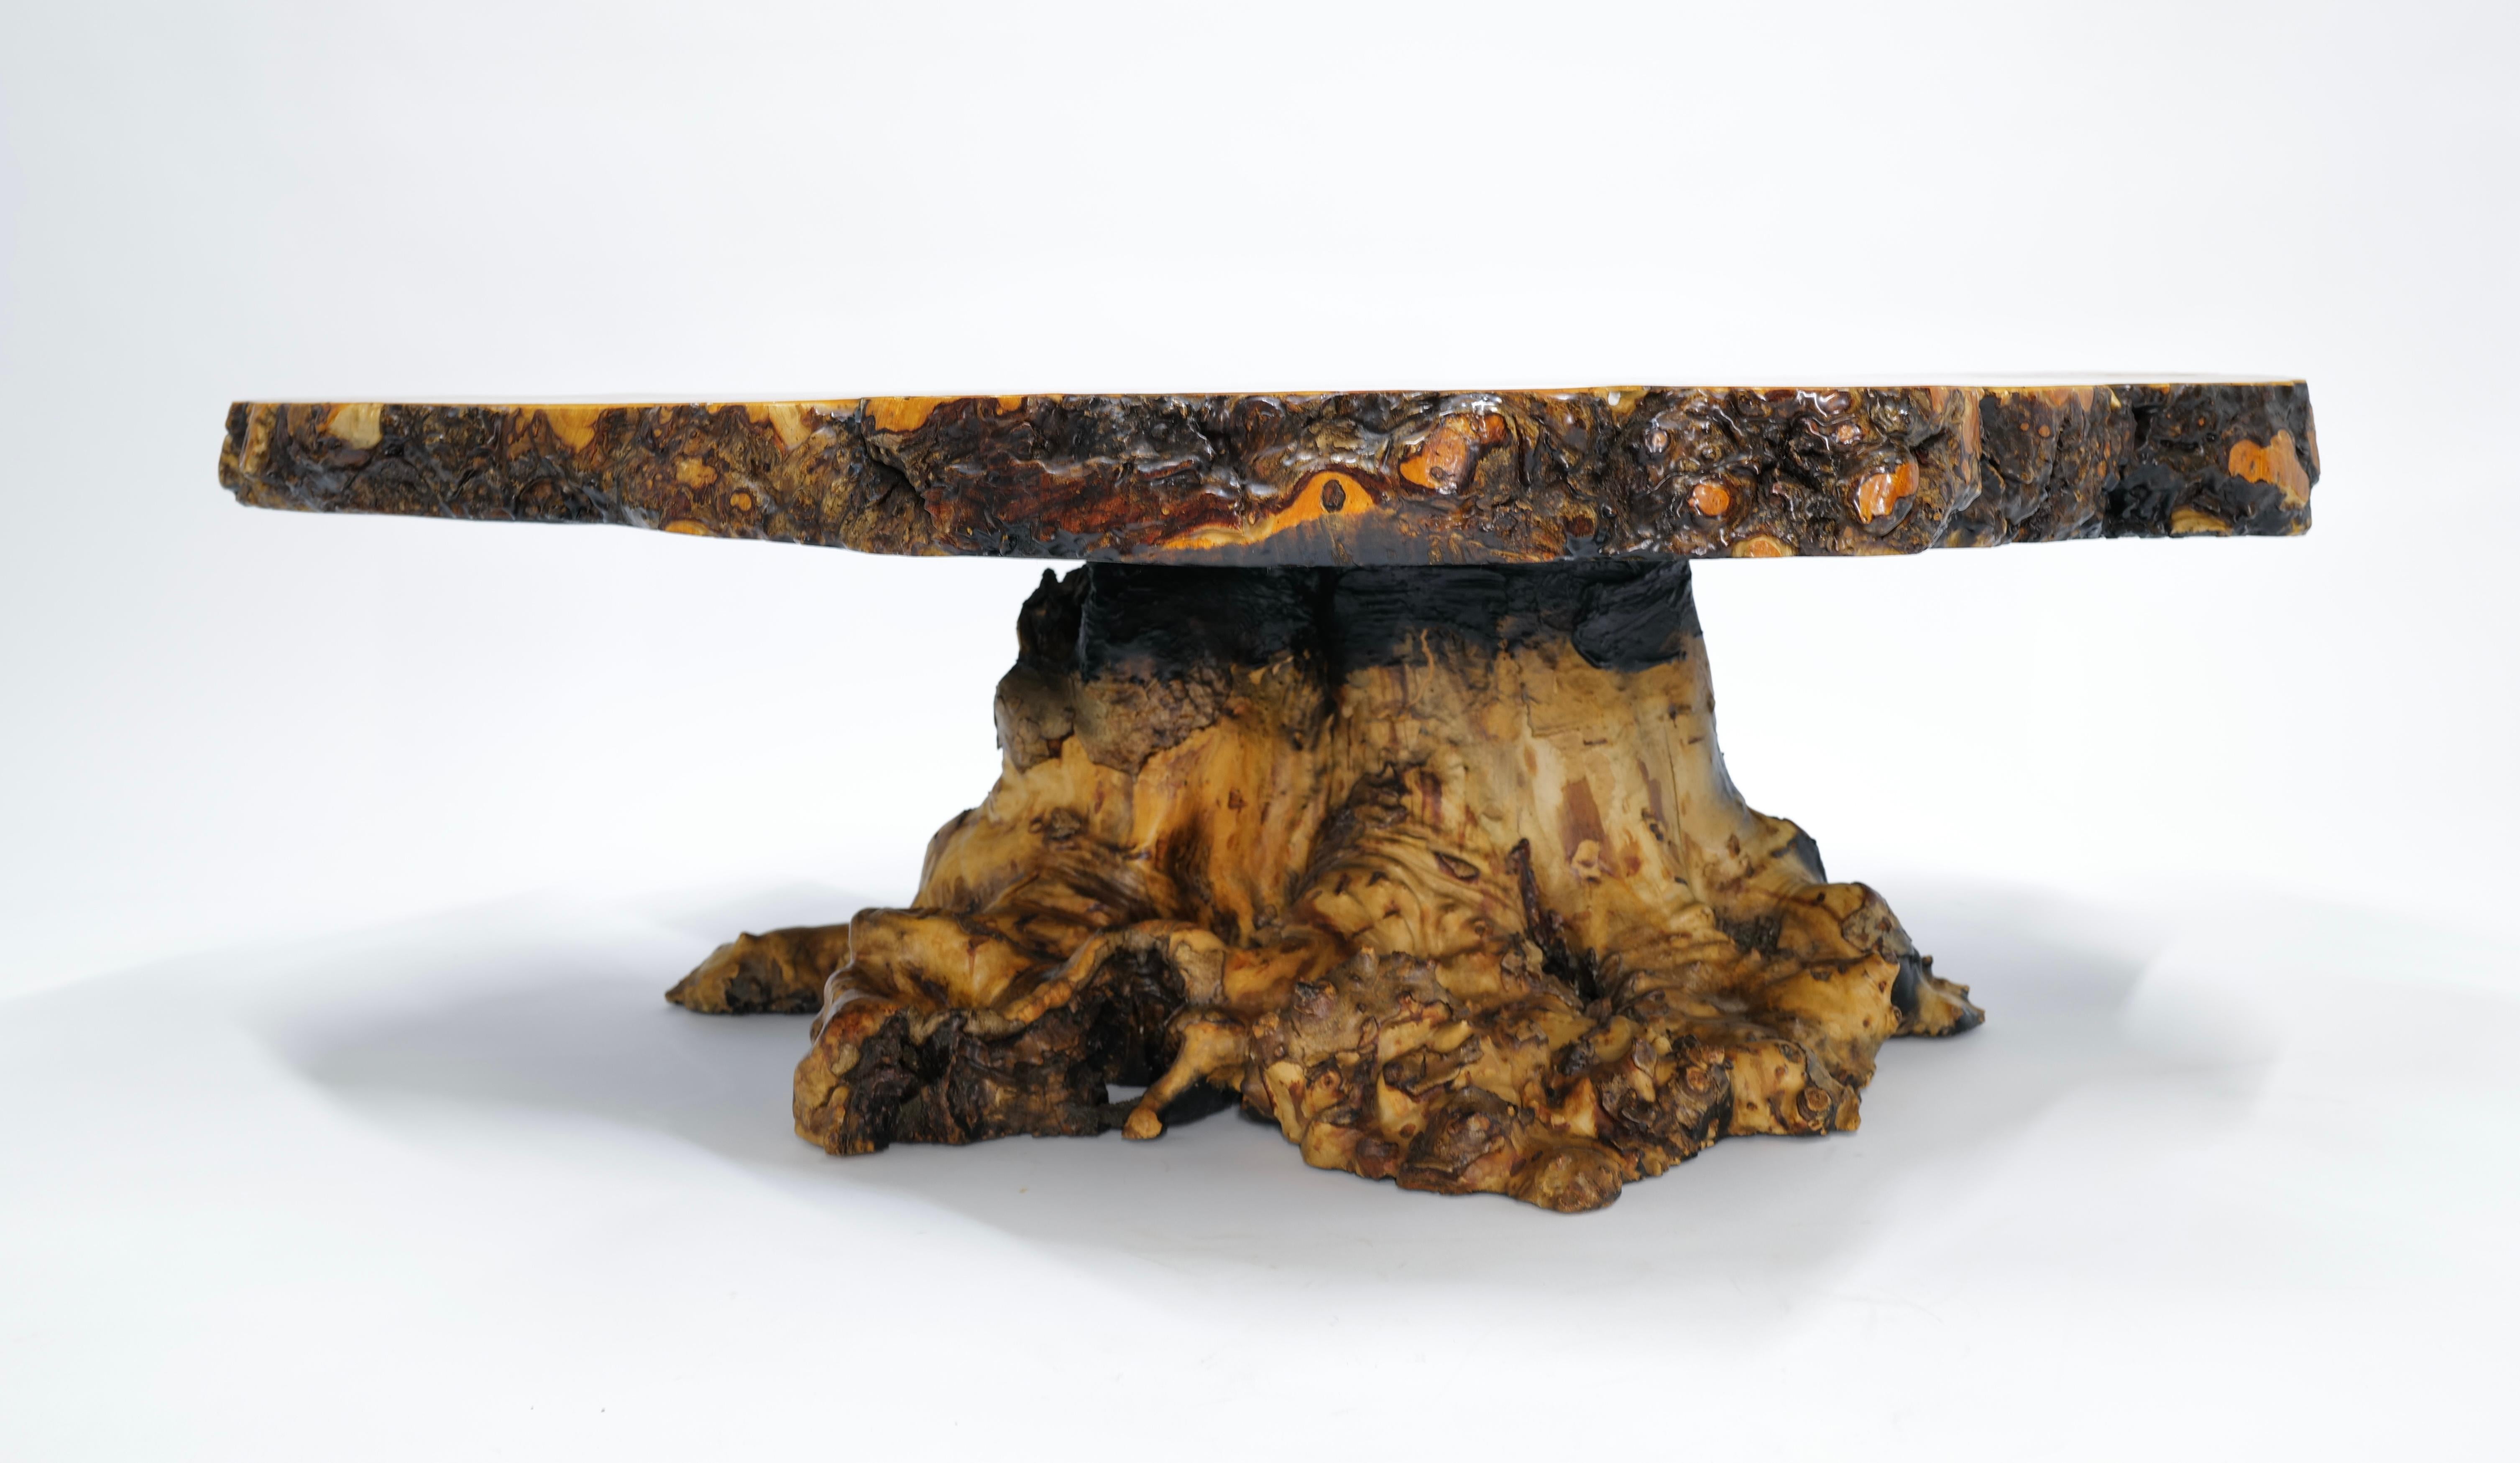 Imagine a stunning piece of furniture that effortlessly blends nature's beauty with elegant design: the Live Edge California Buckeye Burlwood Cocktail Table. Crafted from the finest California Buckeye Burlwood, this table boasts a unique and organic